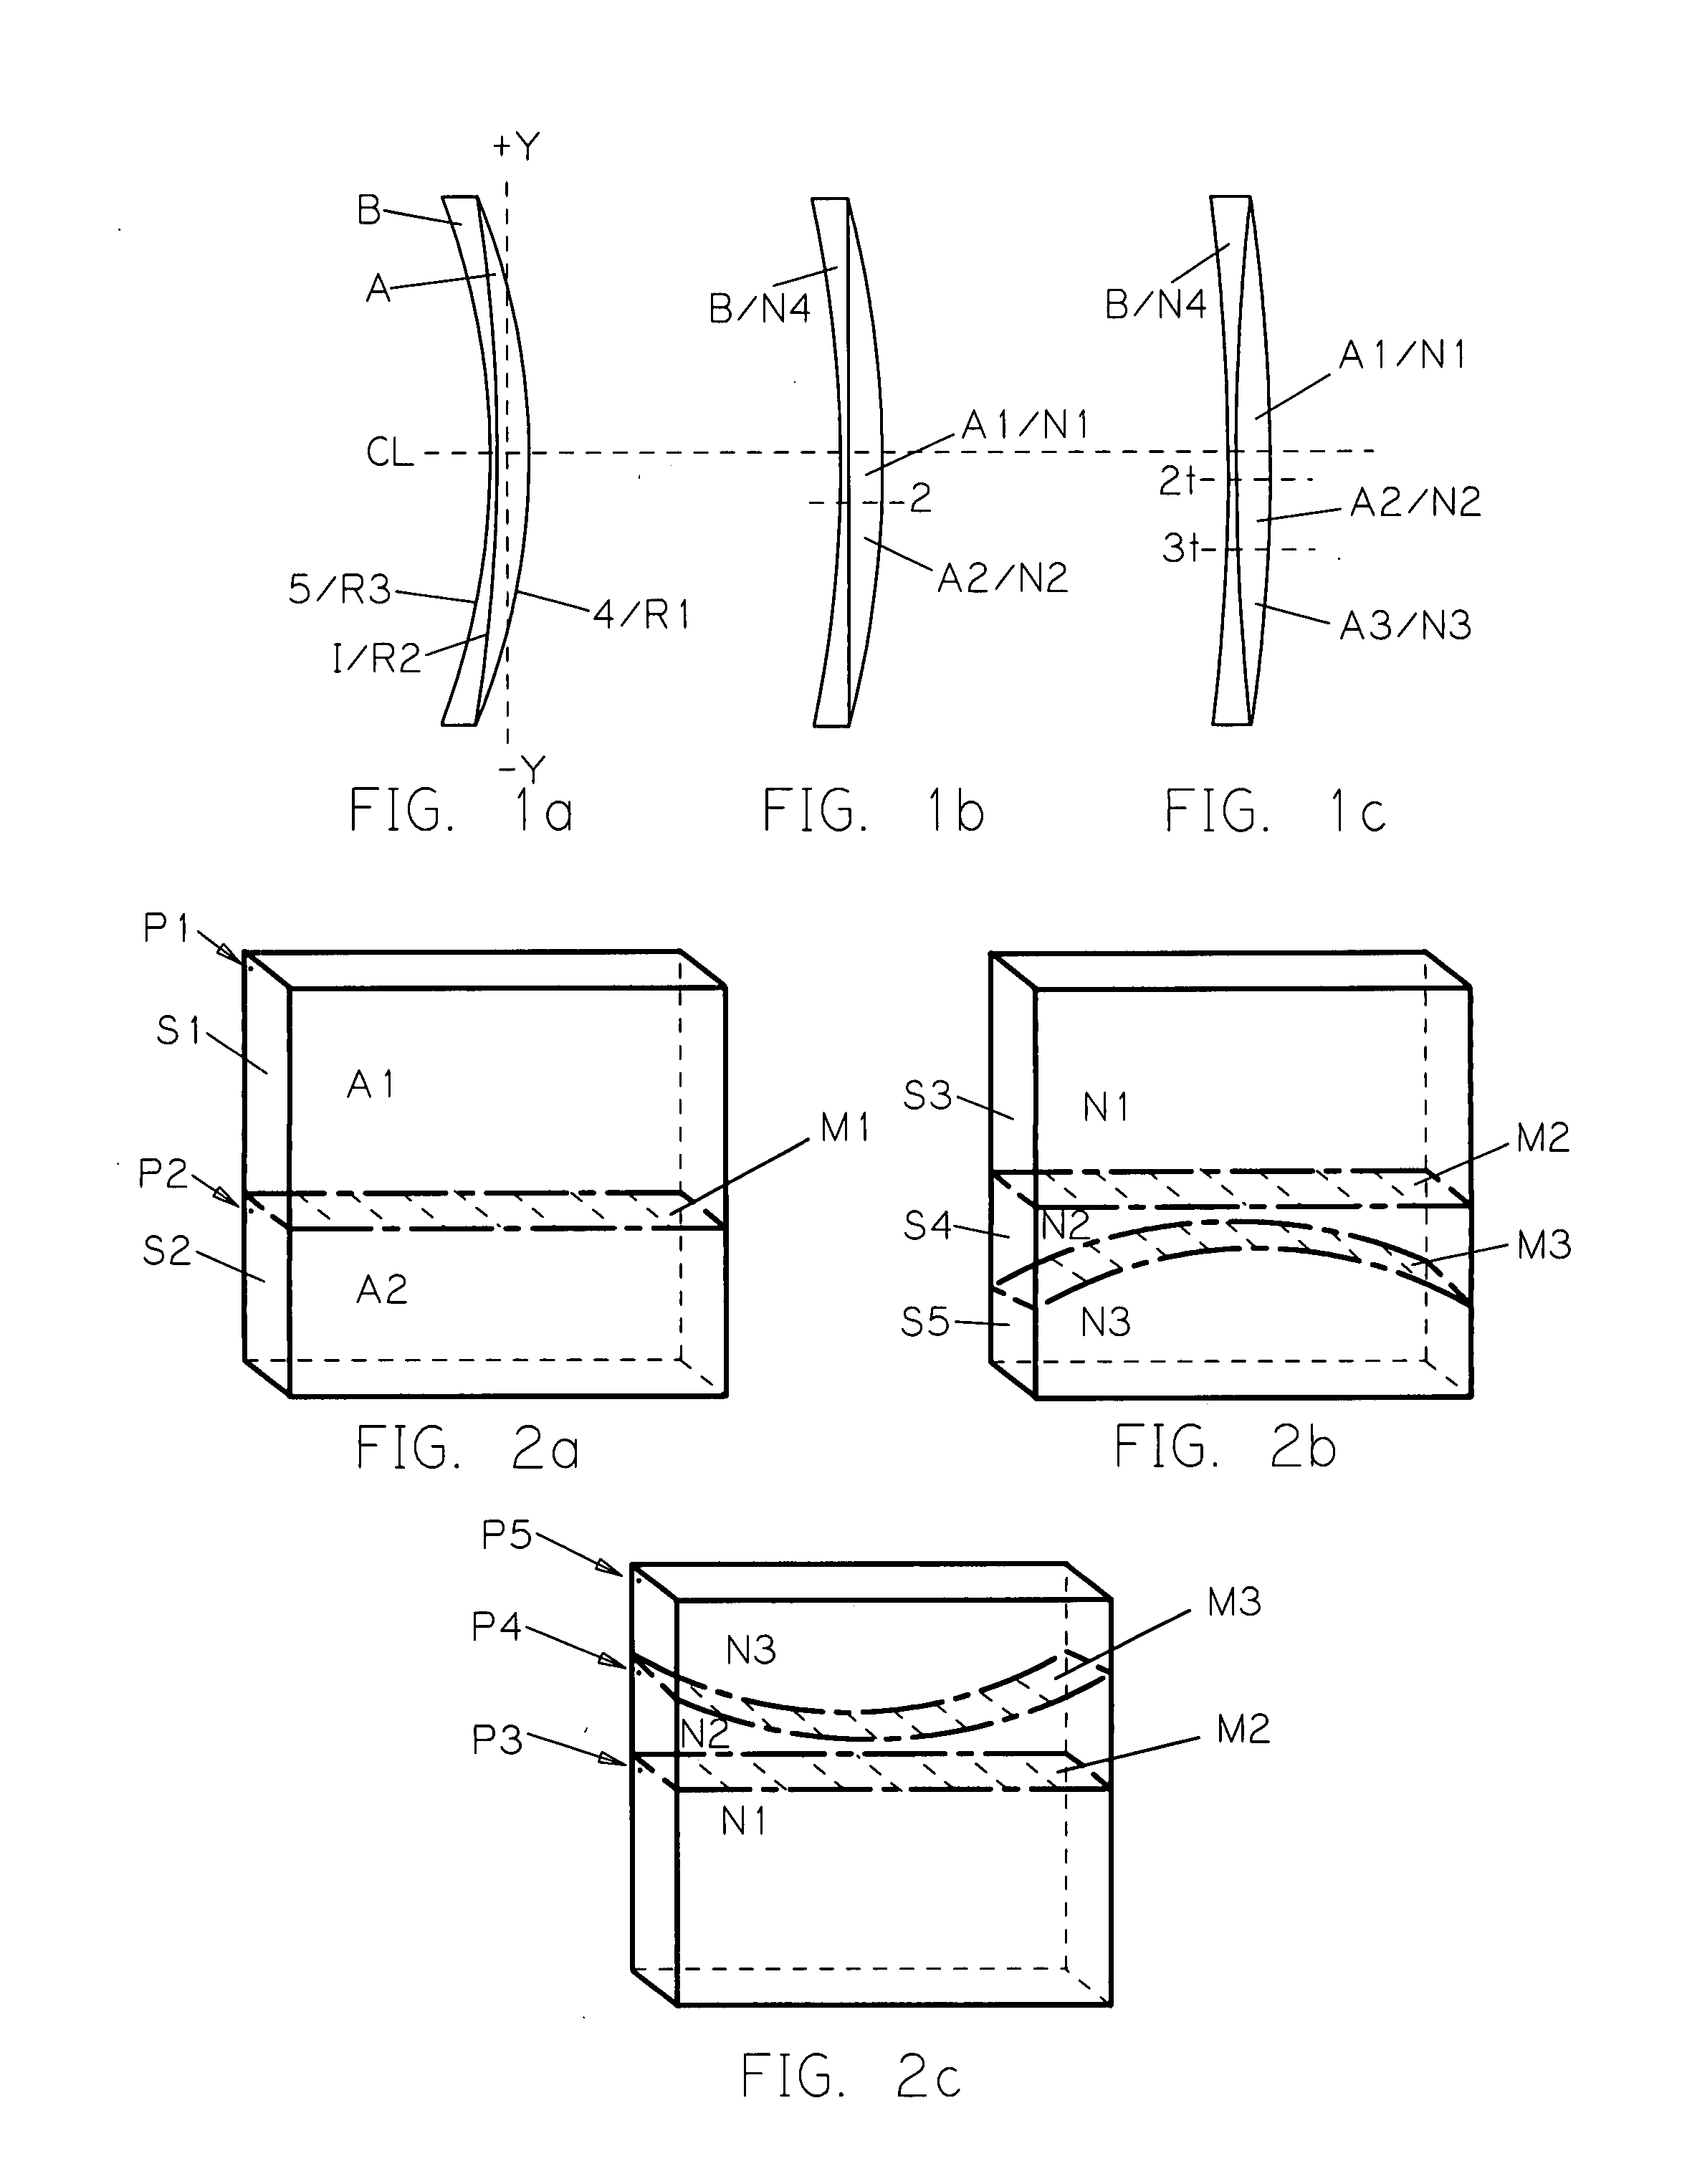 Multi-layered multifocal lens with blended refractive index